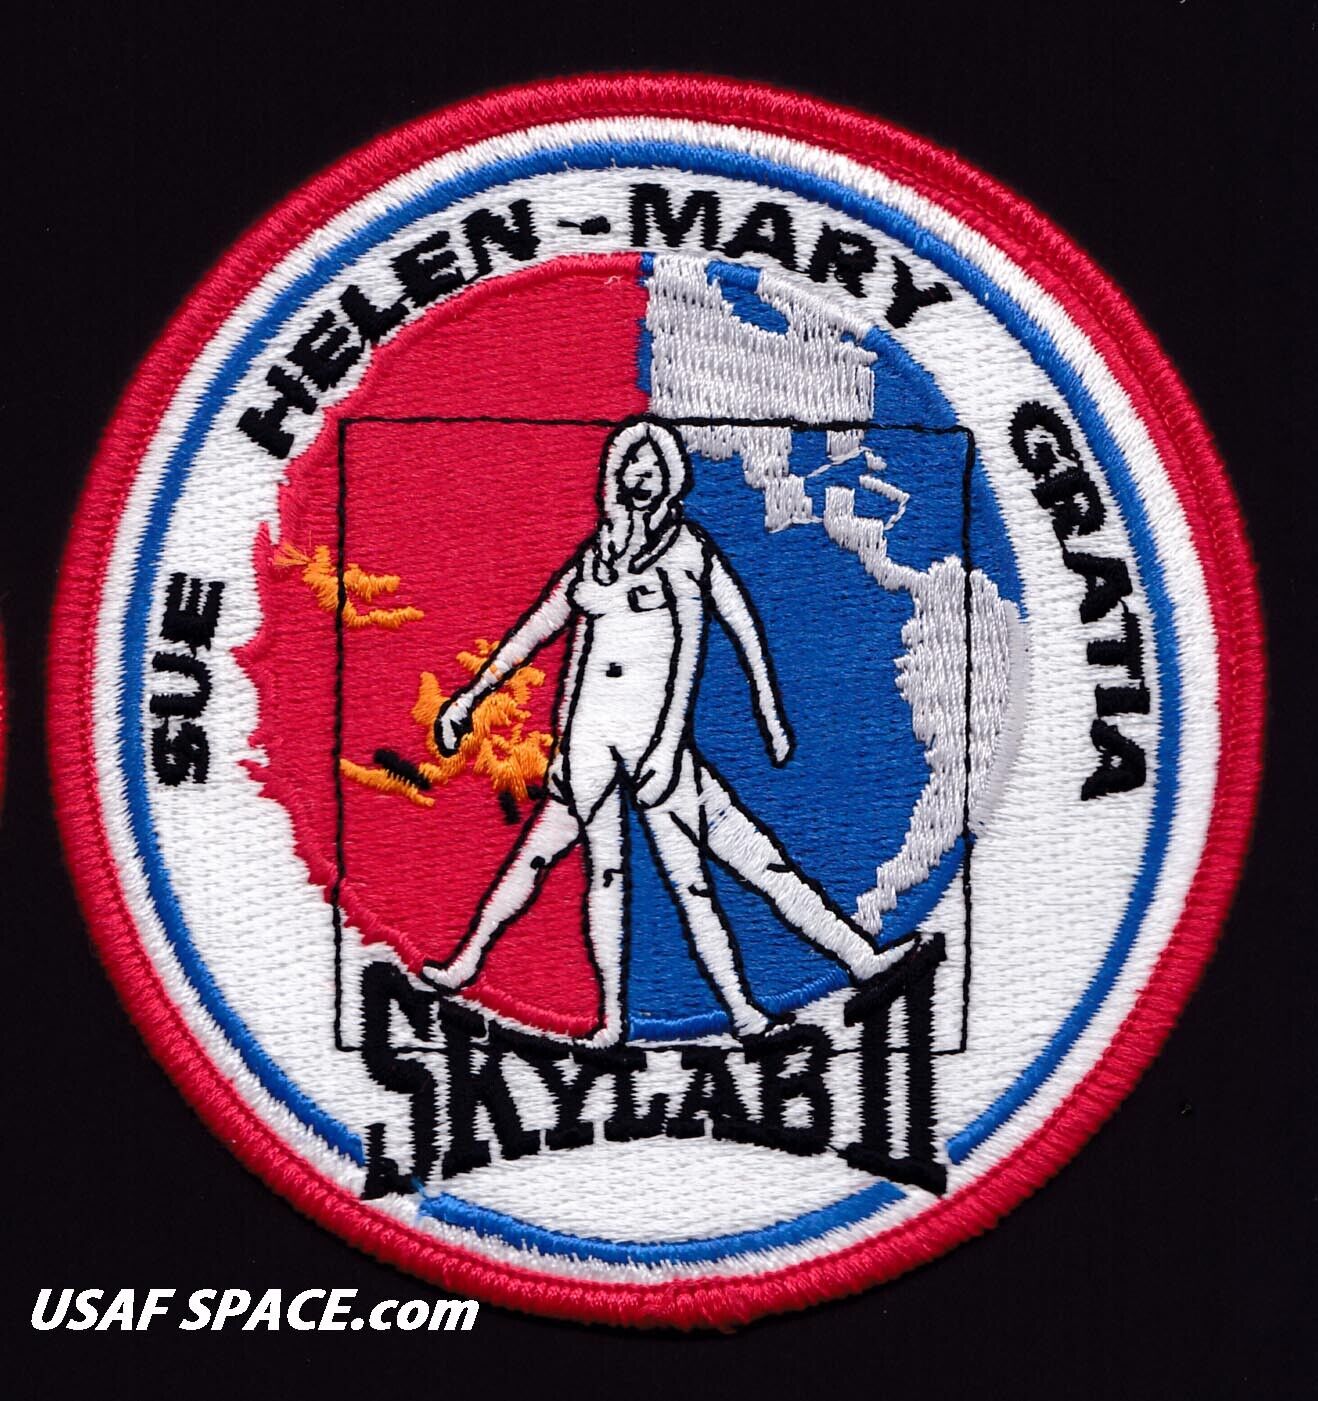 AUTHENTIC AB Emblem- SKYLAB II WIVES -NASA- FULLY EMBROIDERED SPACE PATCH - USA